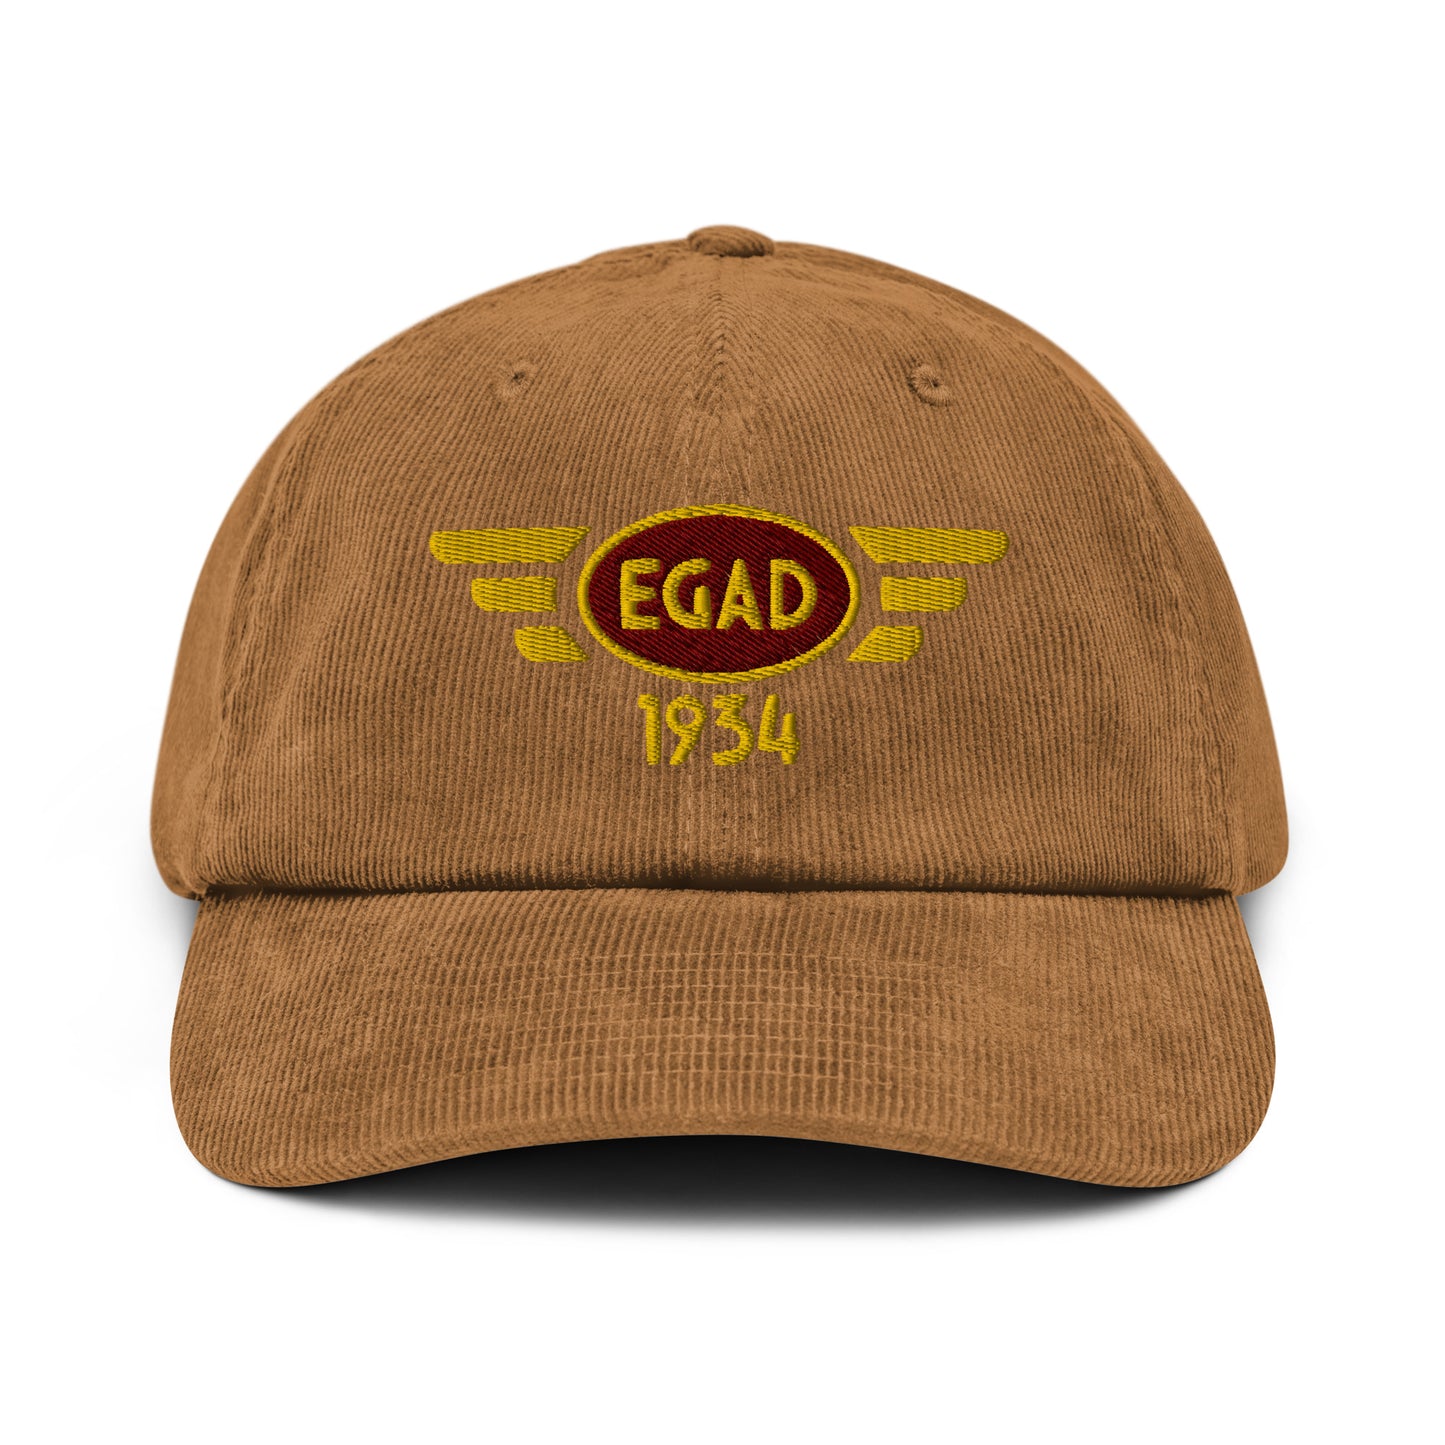 Newtownards Airport corduroy cap with embroidered ICAO code.